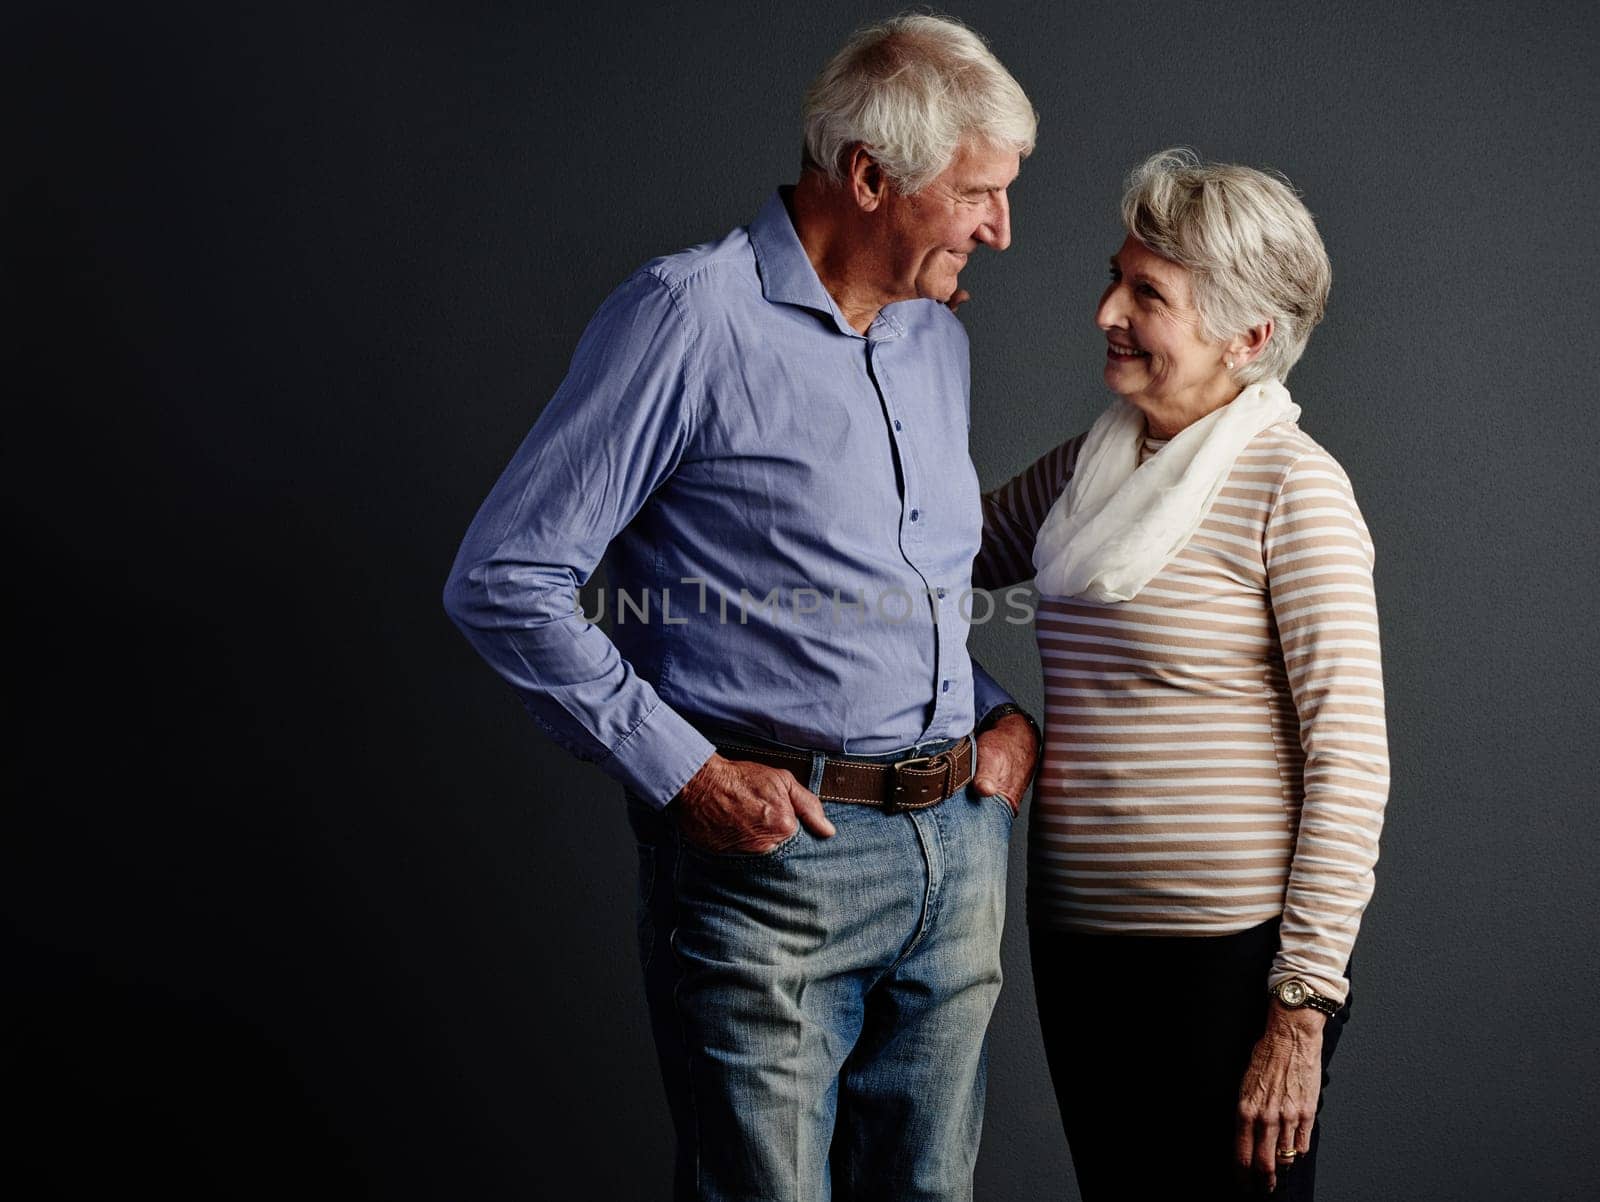 Gazing deeply into her eyes. Studio shot of an affectionate senior couple posing against a grey background. by YuriArcurs